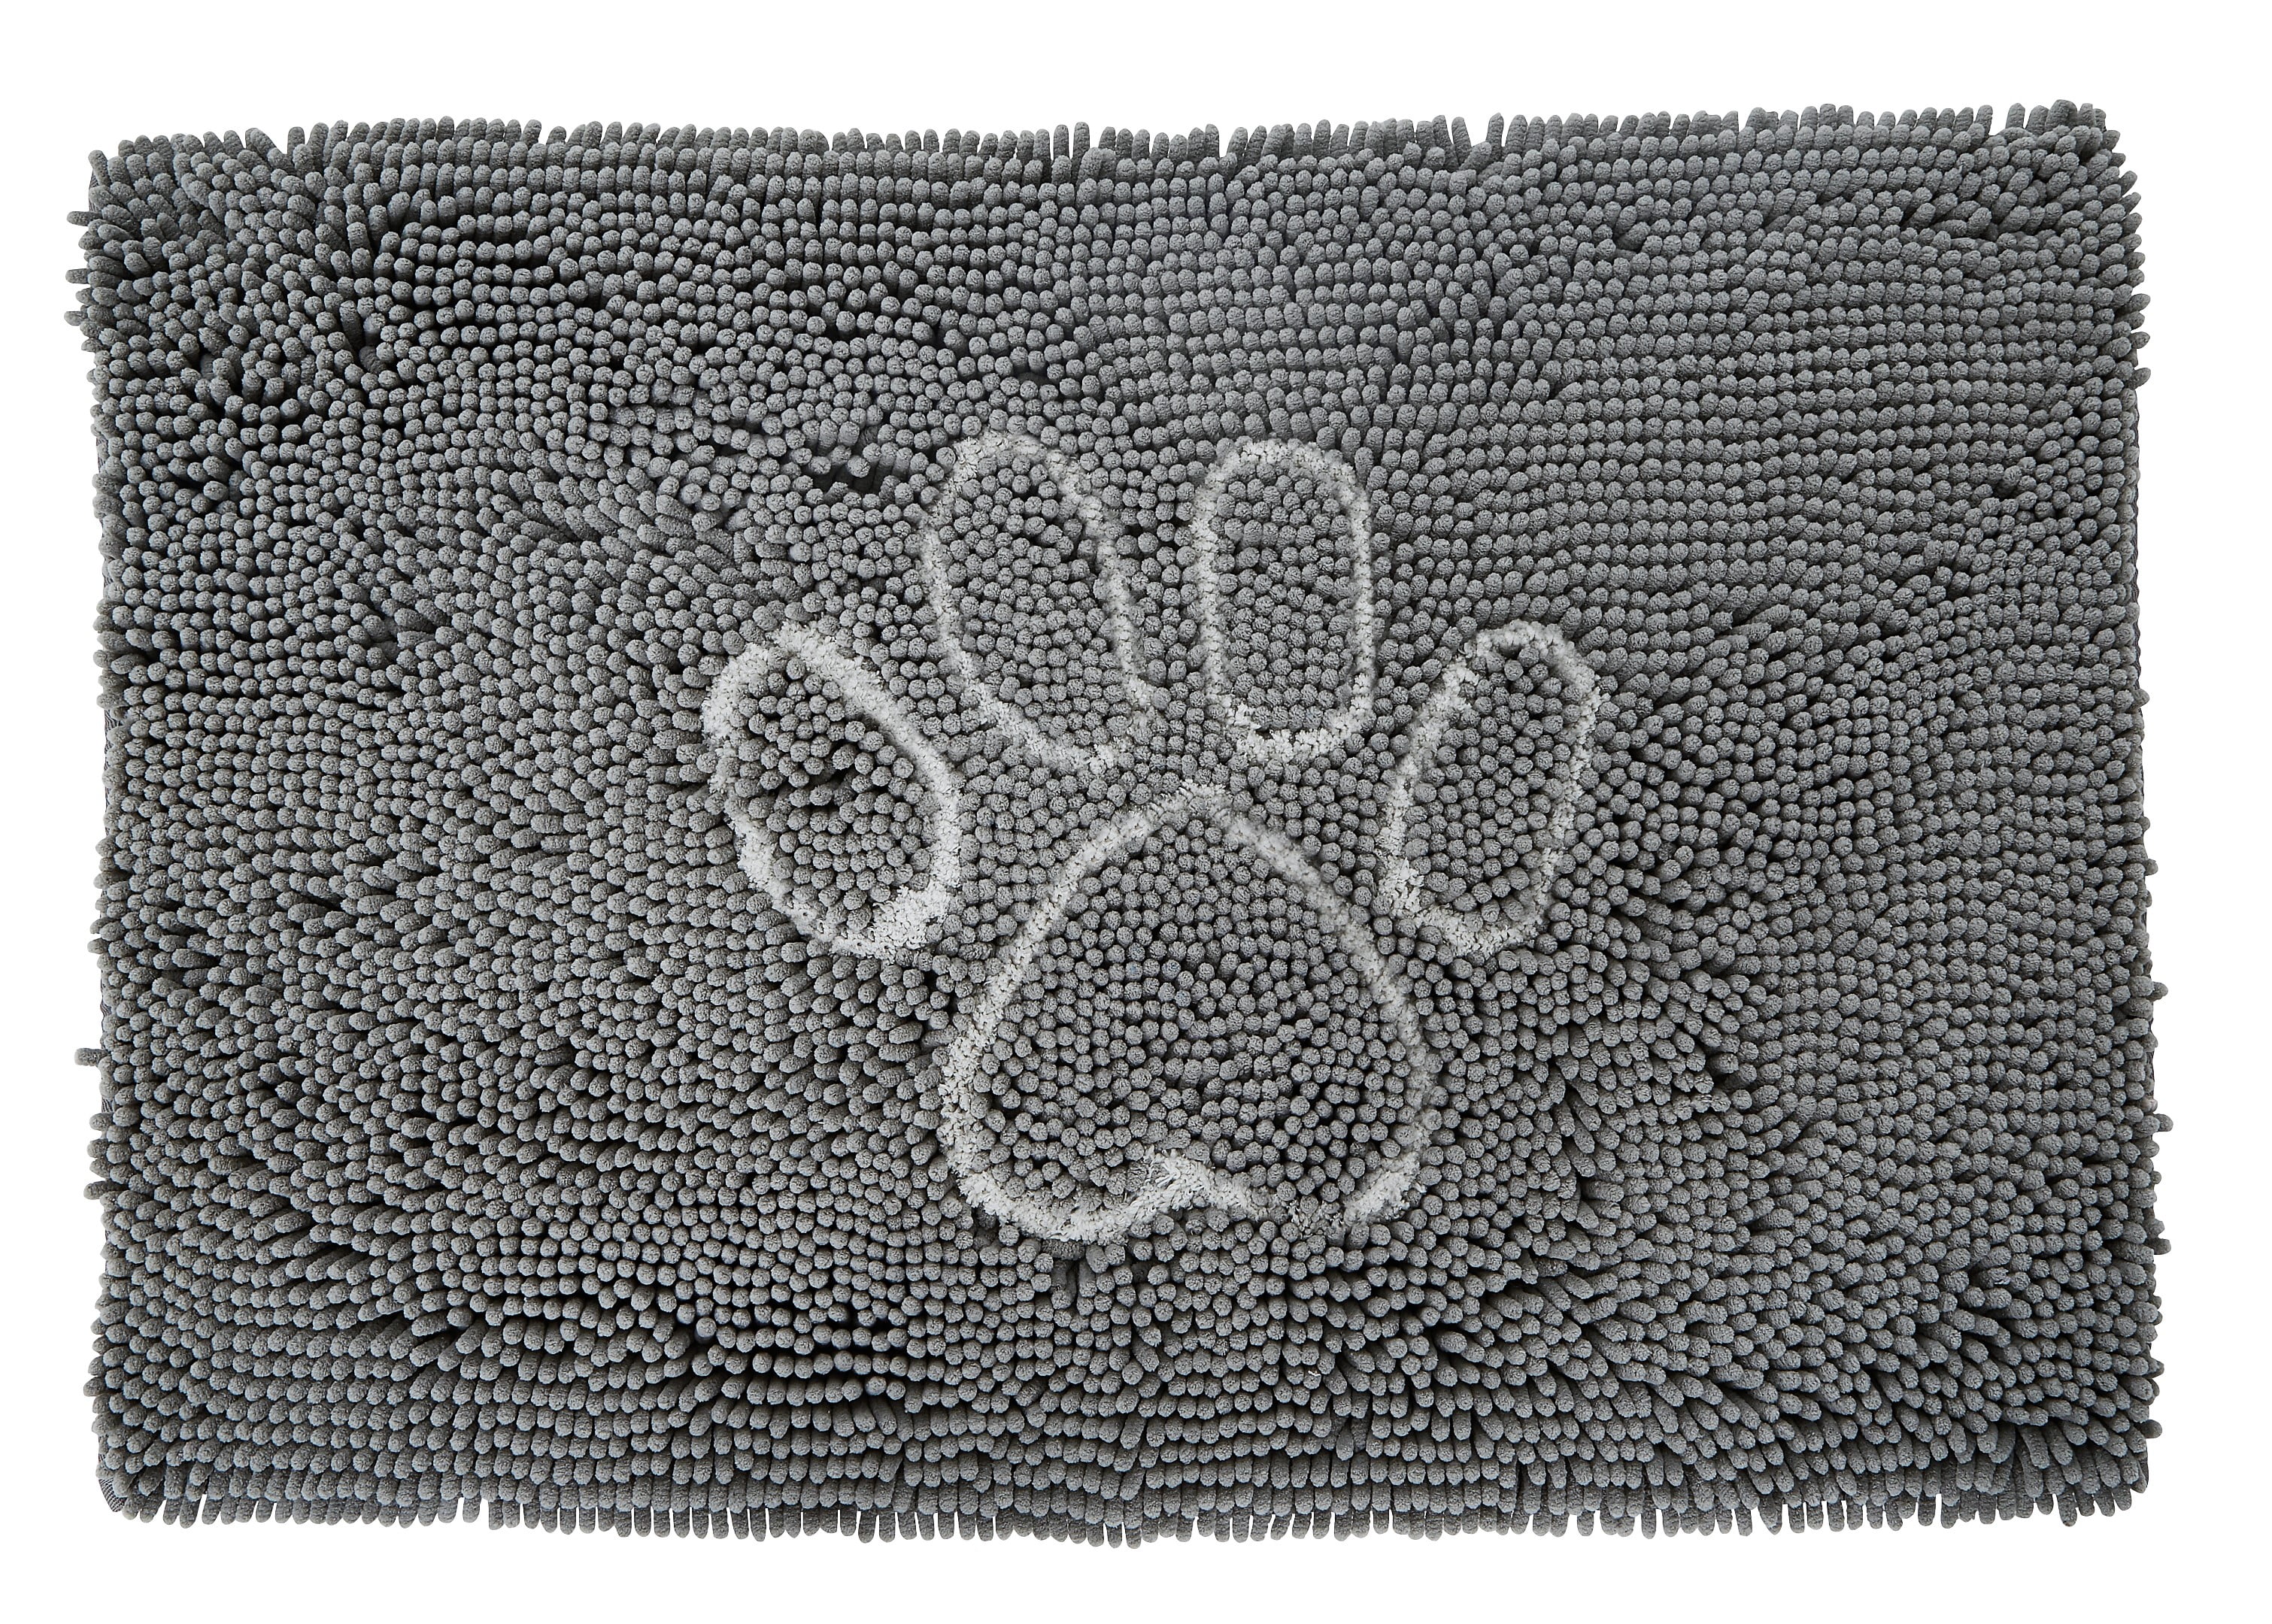 Durable Backing Traps Water and Moisture 30x20 Rug Door Mat for Entry for Muddy Shoes and Dog Paws Grey High Traffic Areas Washable Gorilla Grip Soft and Absorbent Indoor Chenille Doormat